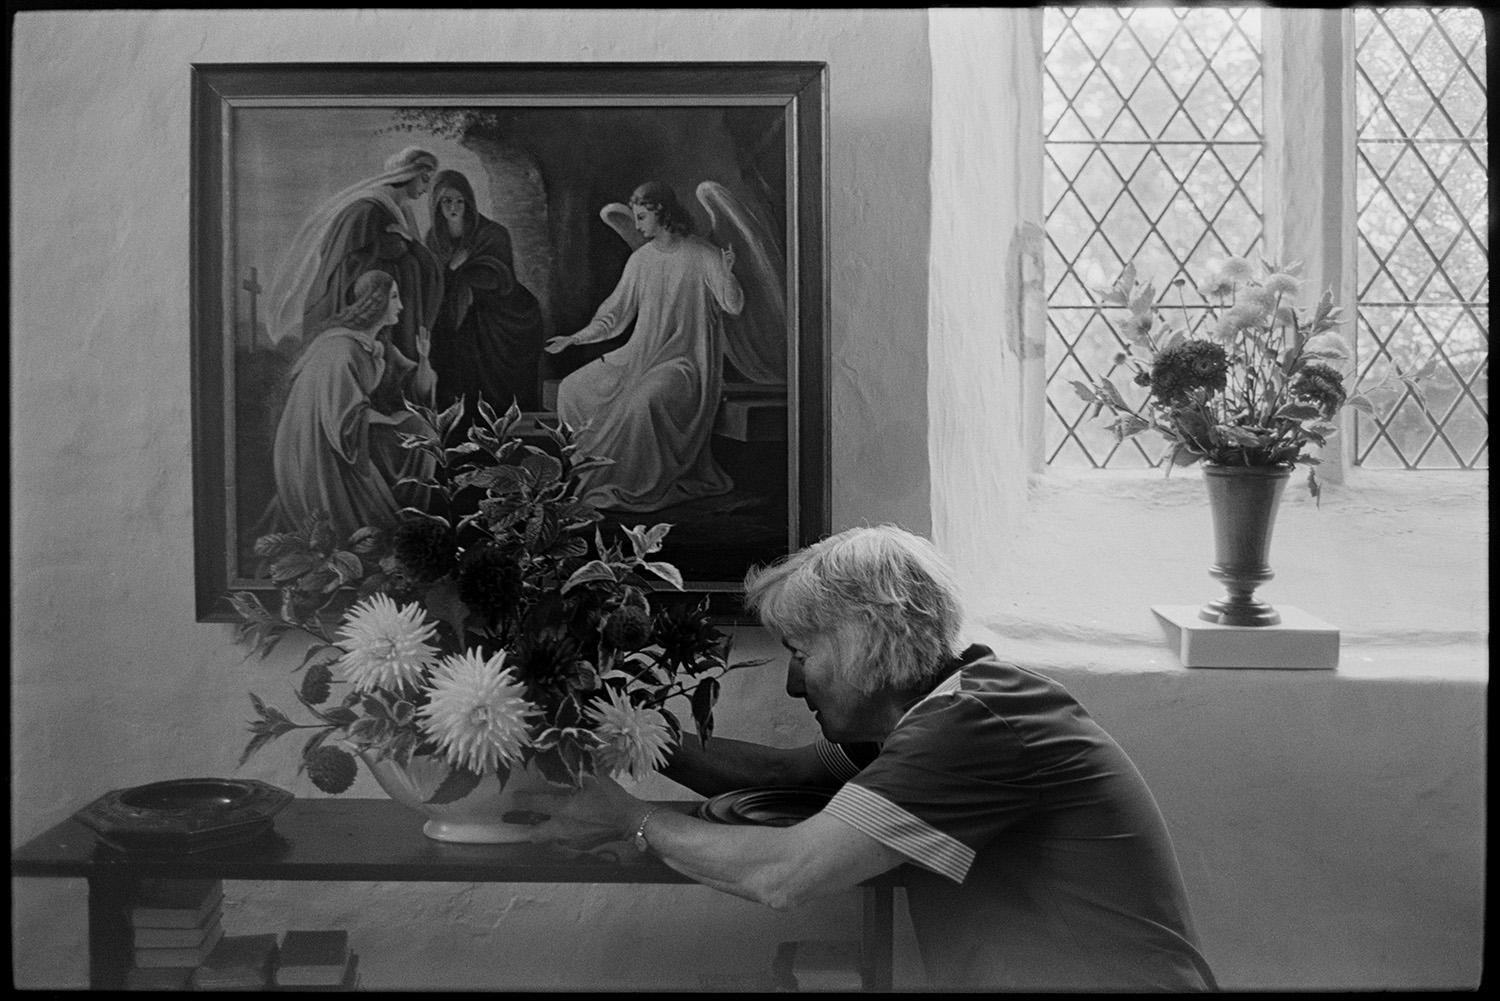 Women decorating church for Harvest Festival, flowers. Religious painting on wall. 
[Evelyn Folland making a floral decoration in front of a religious painting on the wall for the Harvest Festival at Dowland Church.]